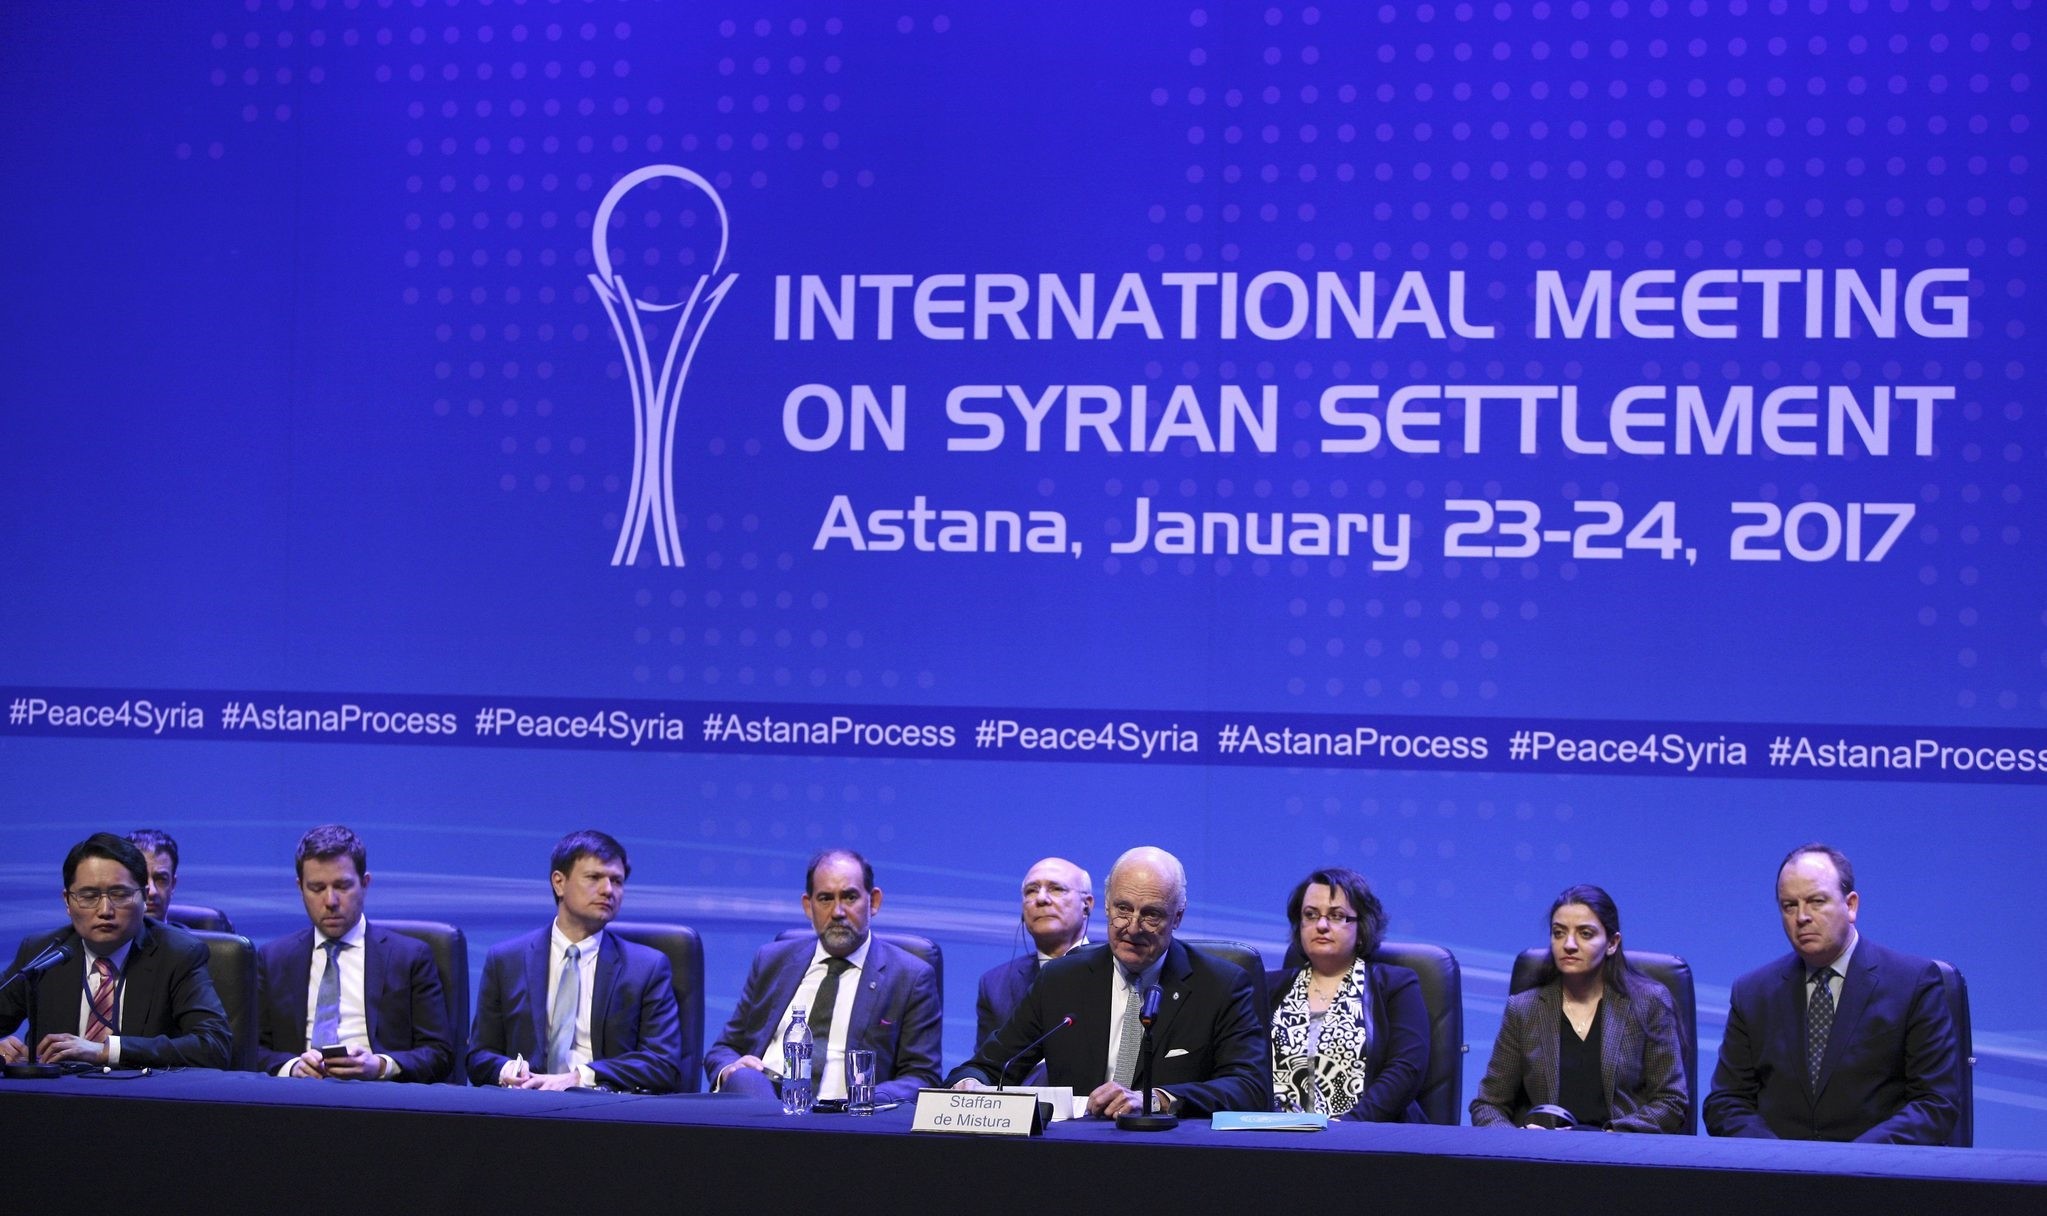 U.N. special envoy for Syria Staffan de Mistura attends a news conference following Syria peace talks in Astana, Kazakhstan January 24, 2017. (REUTERS Photo)